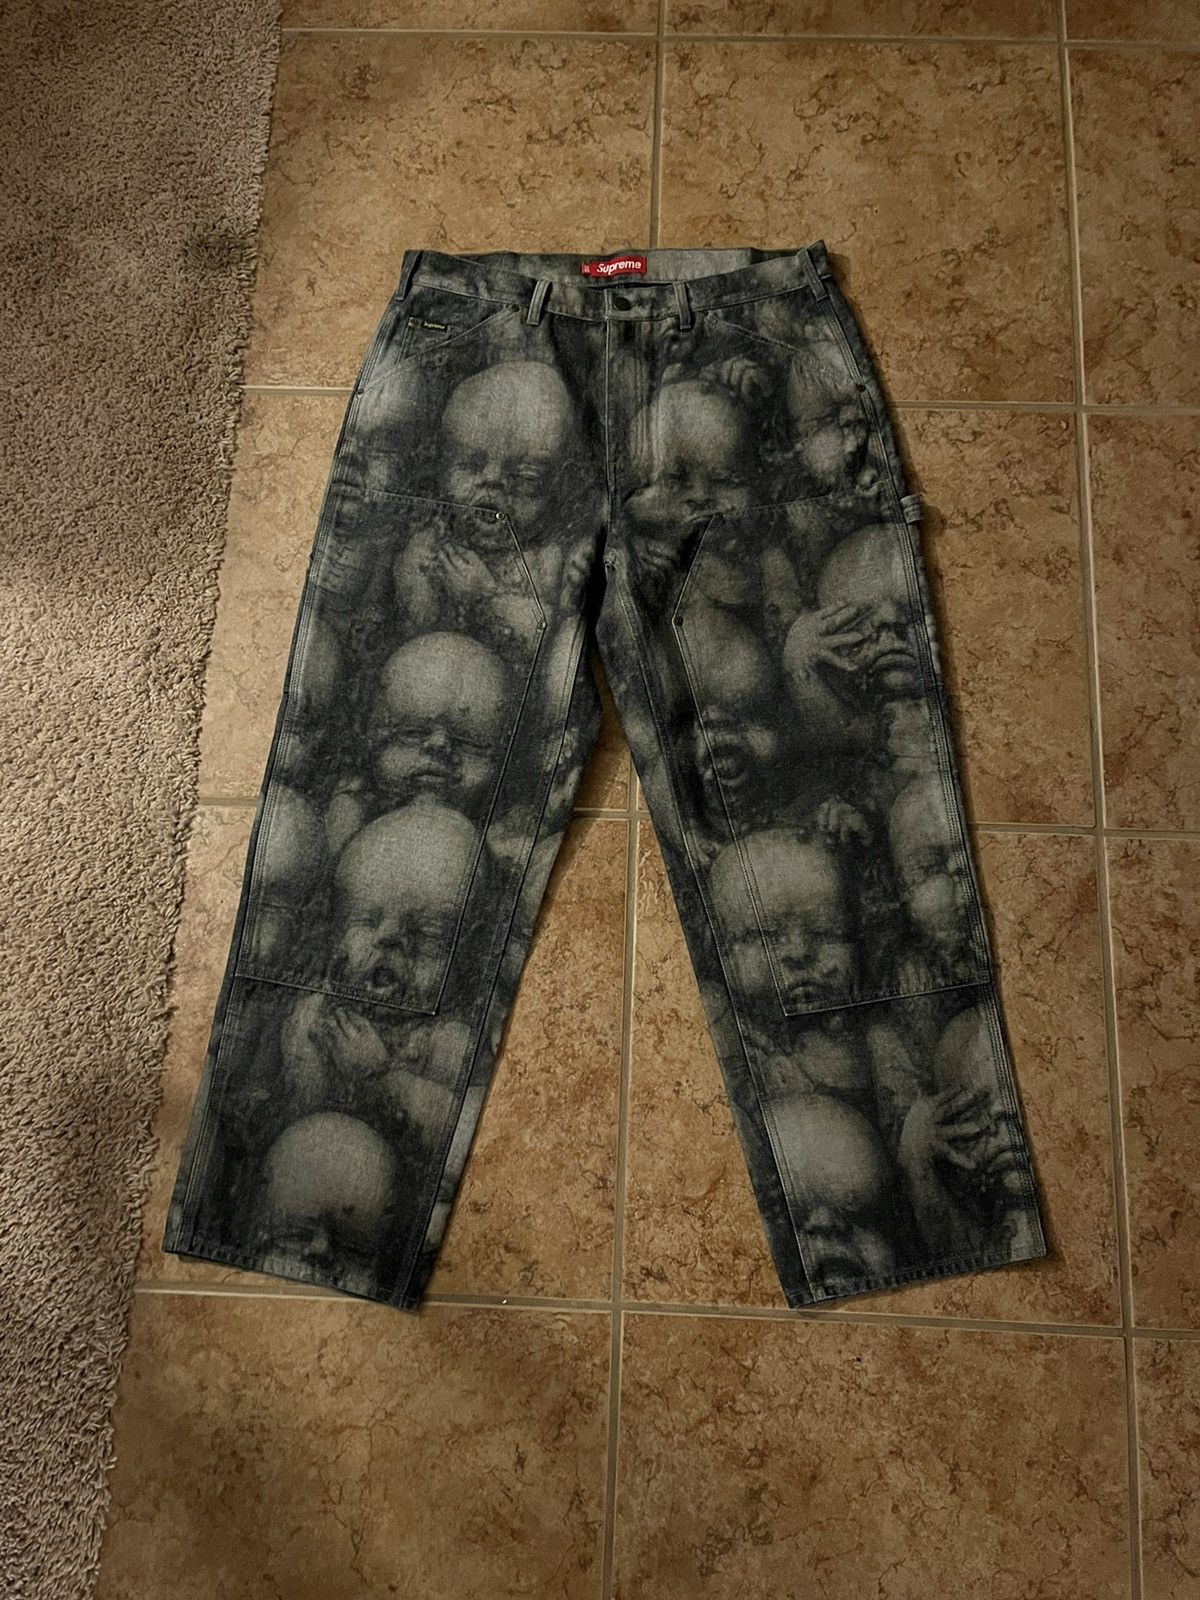 Supreme FW23 Supreme HR Giger baby double knee pants | Grailed